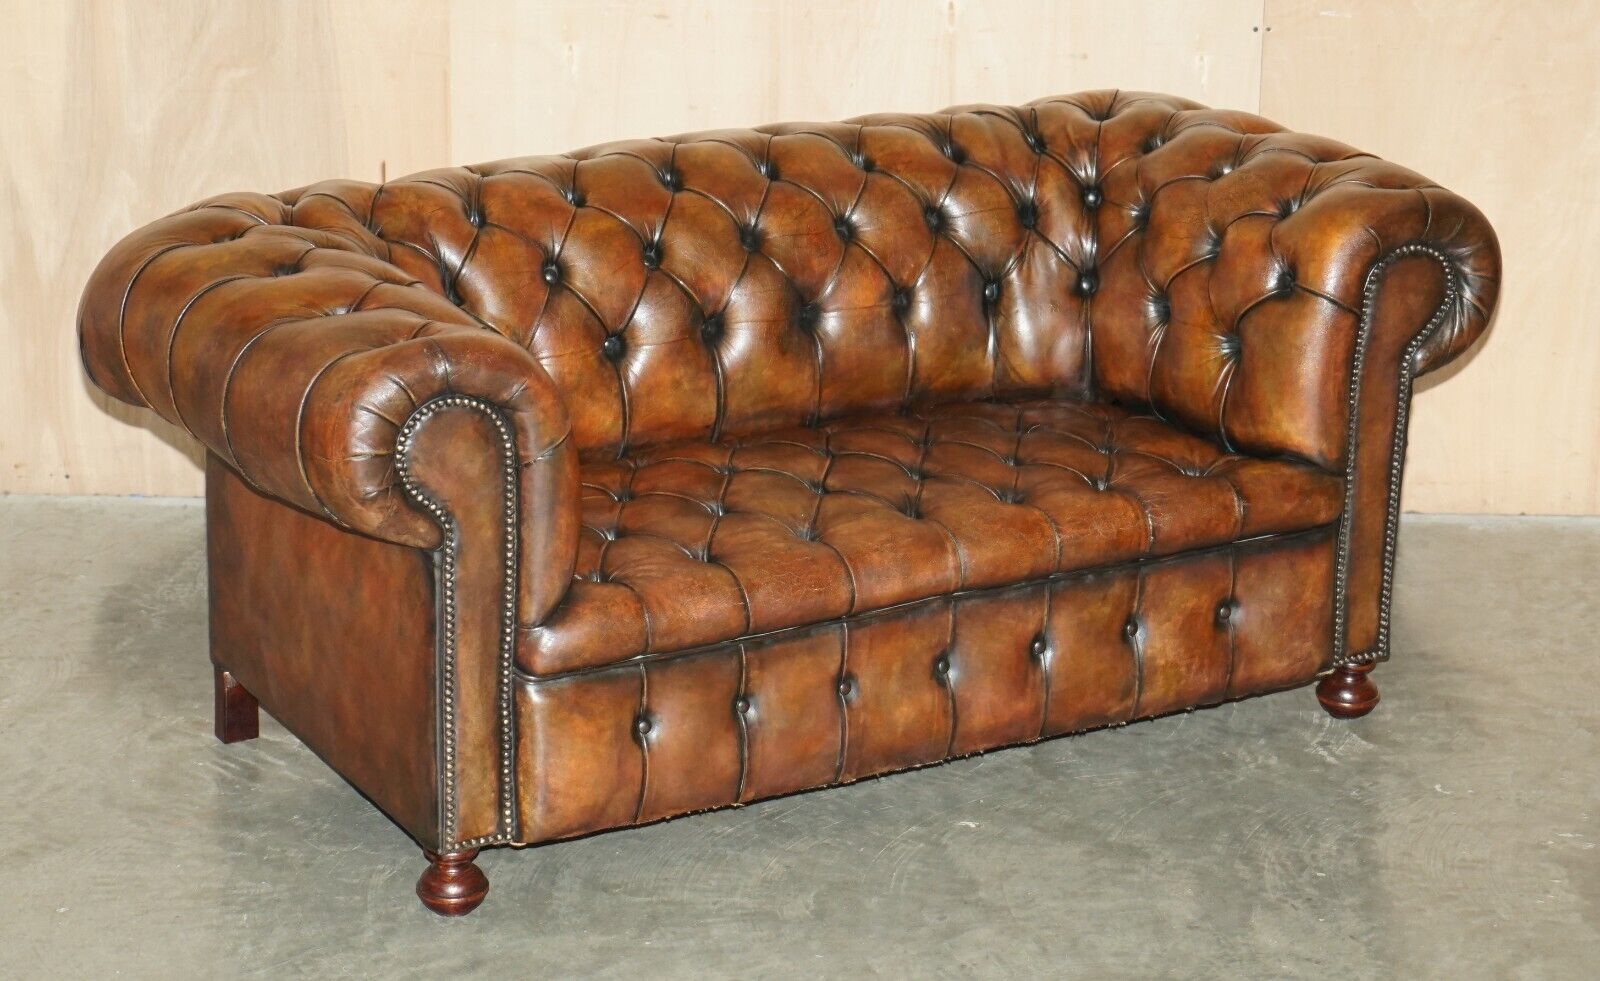 RESTORED VICTORIAN 1890 EXTRA LARGE ARMED CHESTERFIELD BROWN LEATHER CLUB SOFA